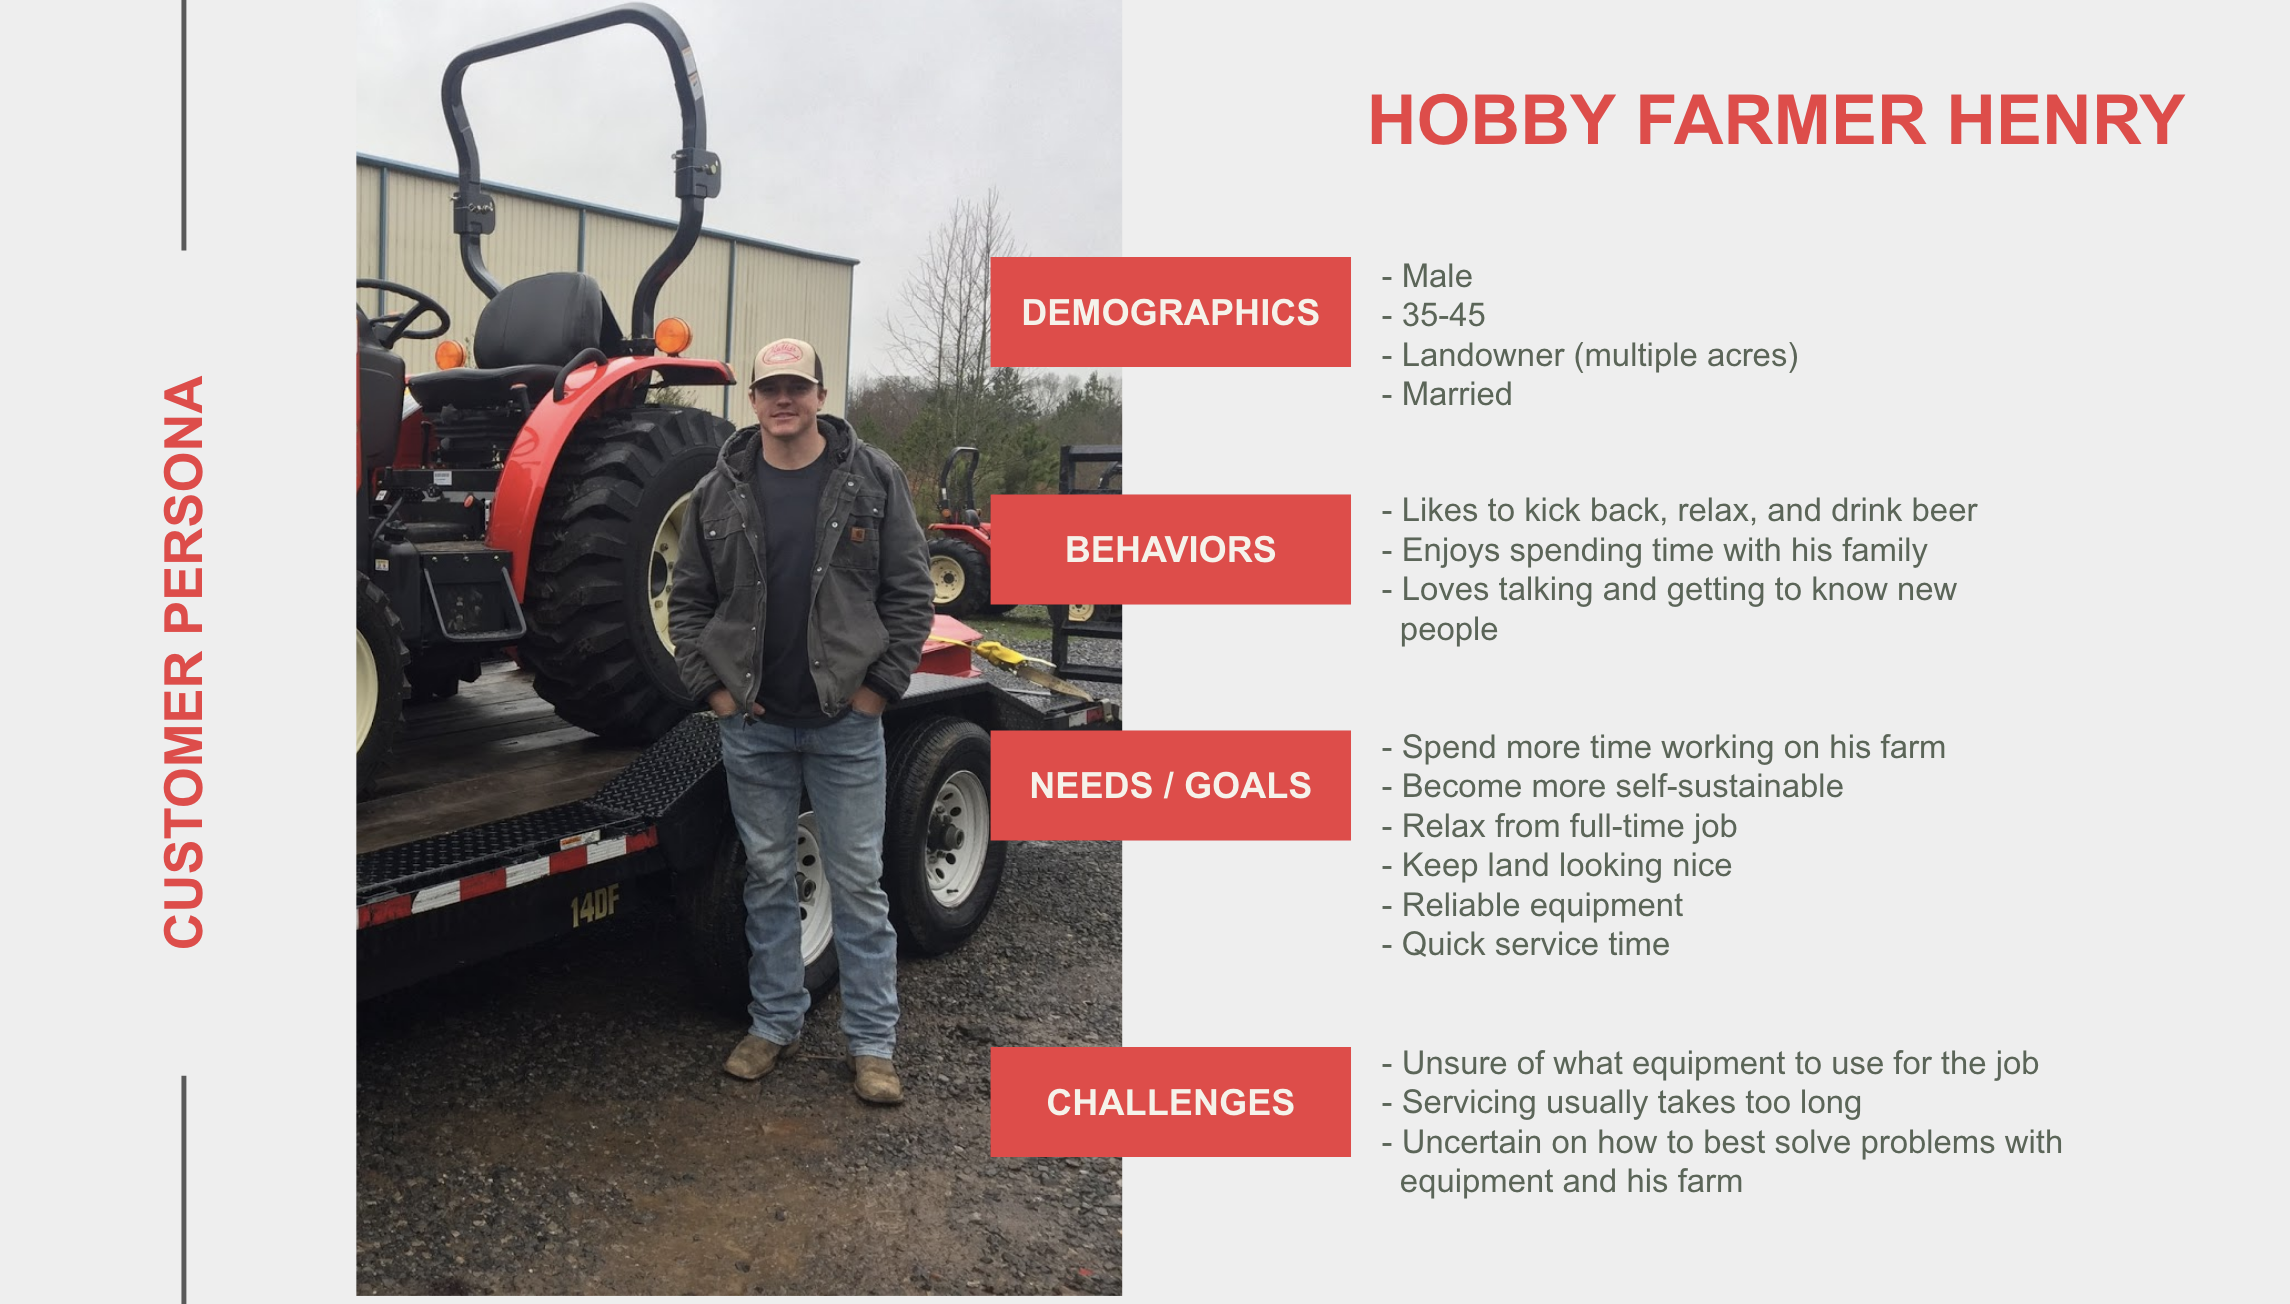 A graphic shows a hobby farmer with demographics, behaviors, needs/goals, and challenges